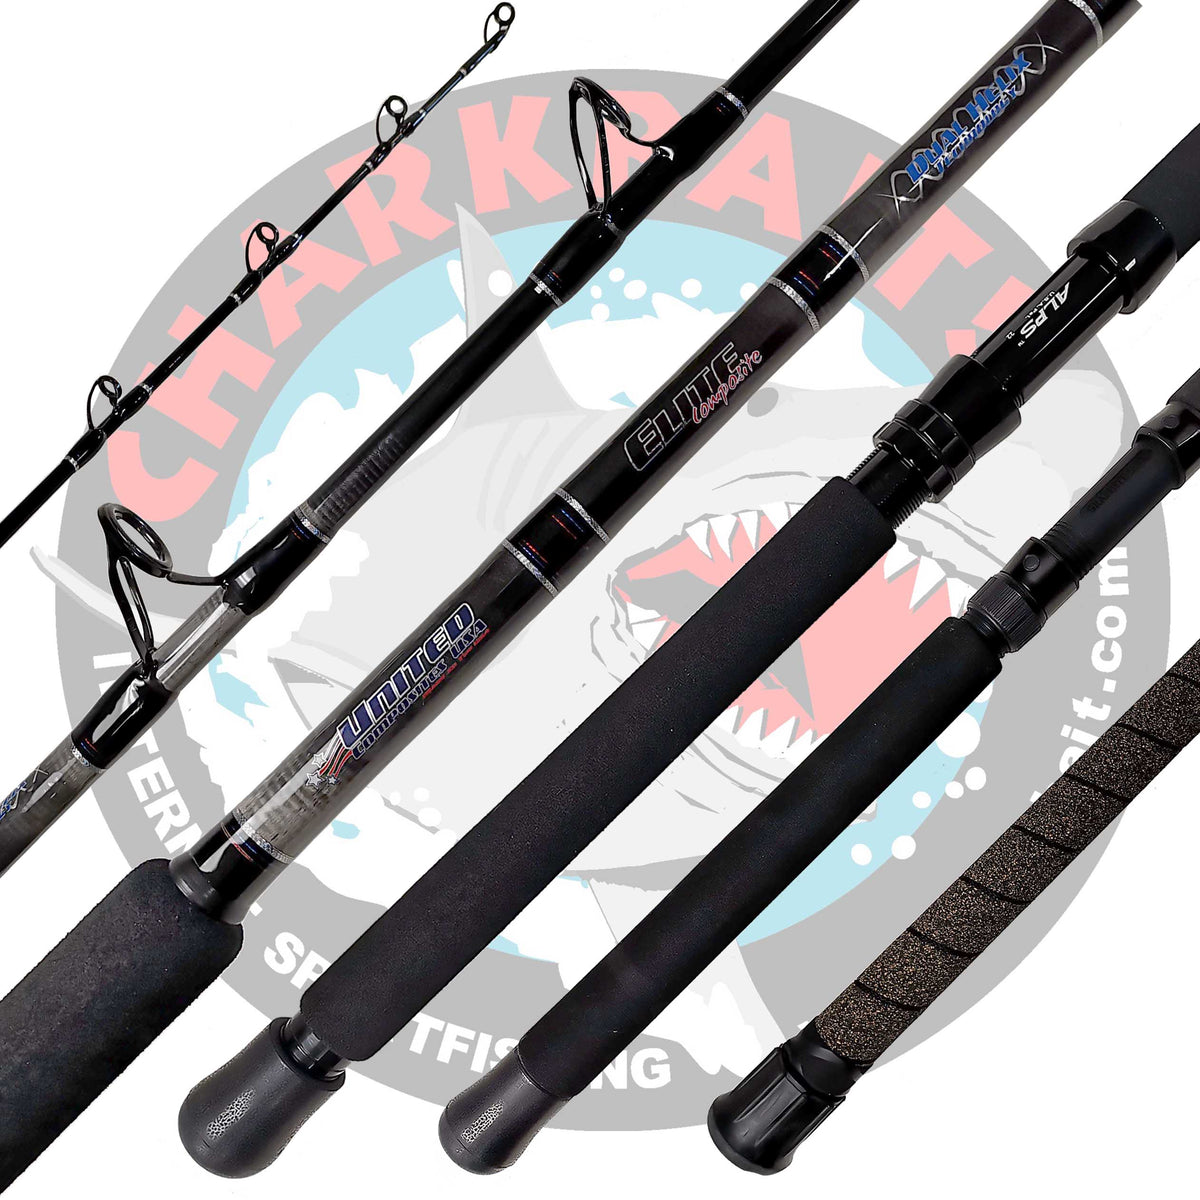 United Composites RCE 700 7ft Conventional Rods — Charkbait